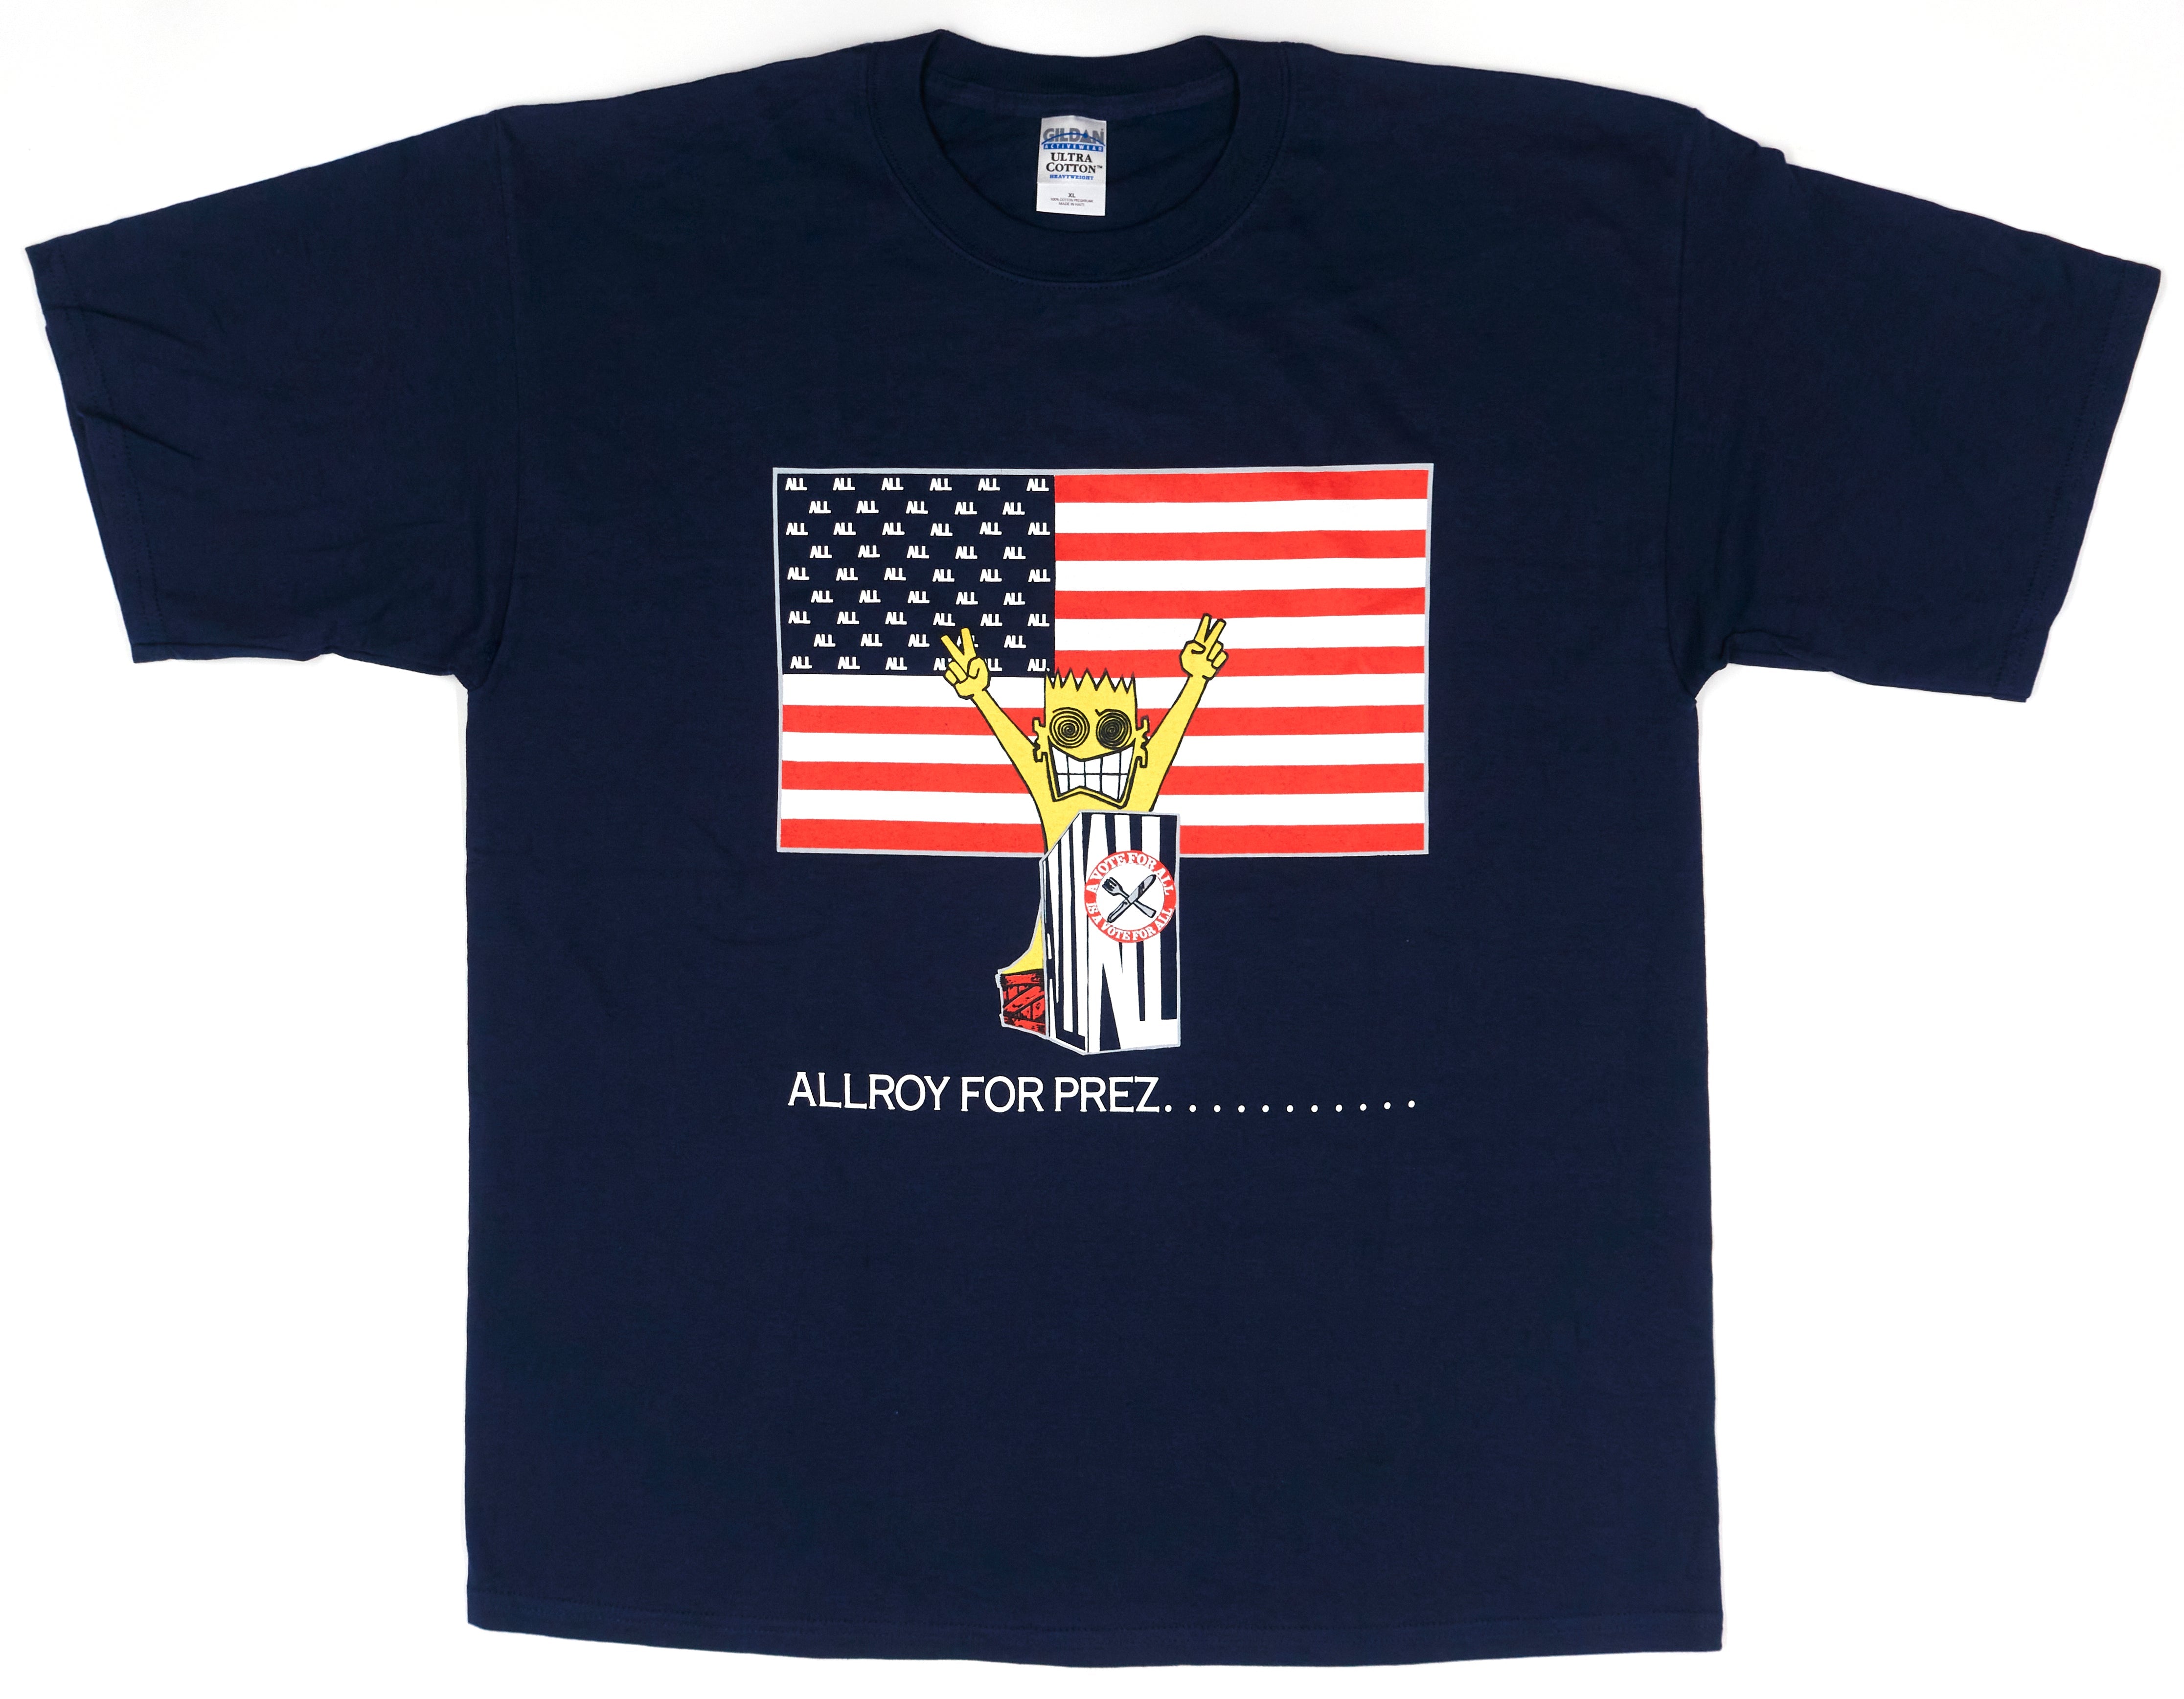 ALL - Allroy For Prez...SST Superstore Shirt Size XL